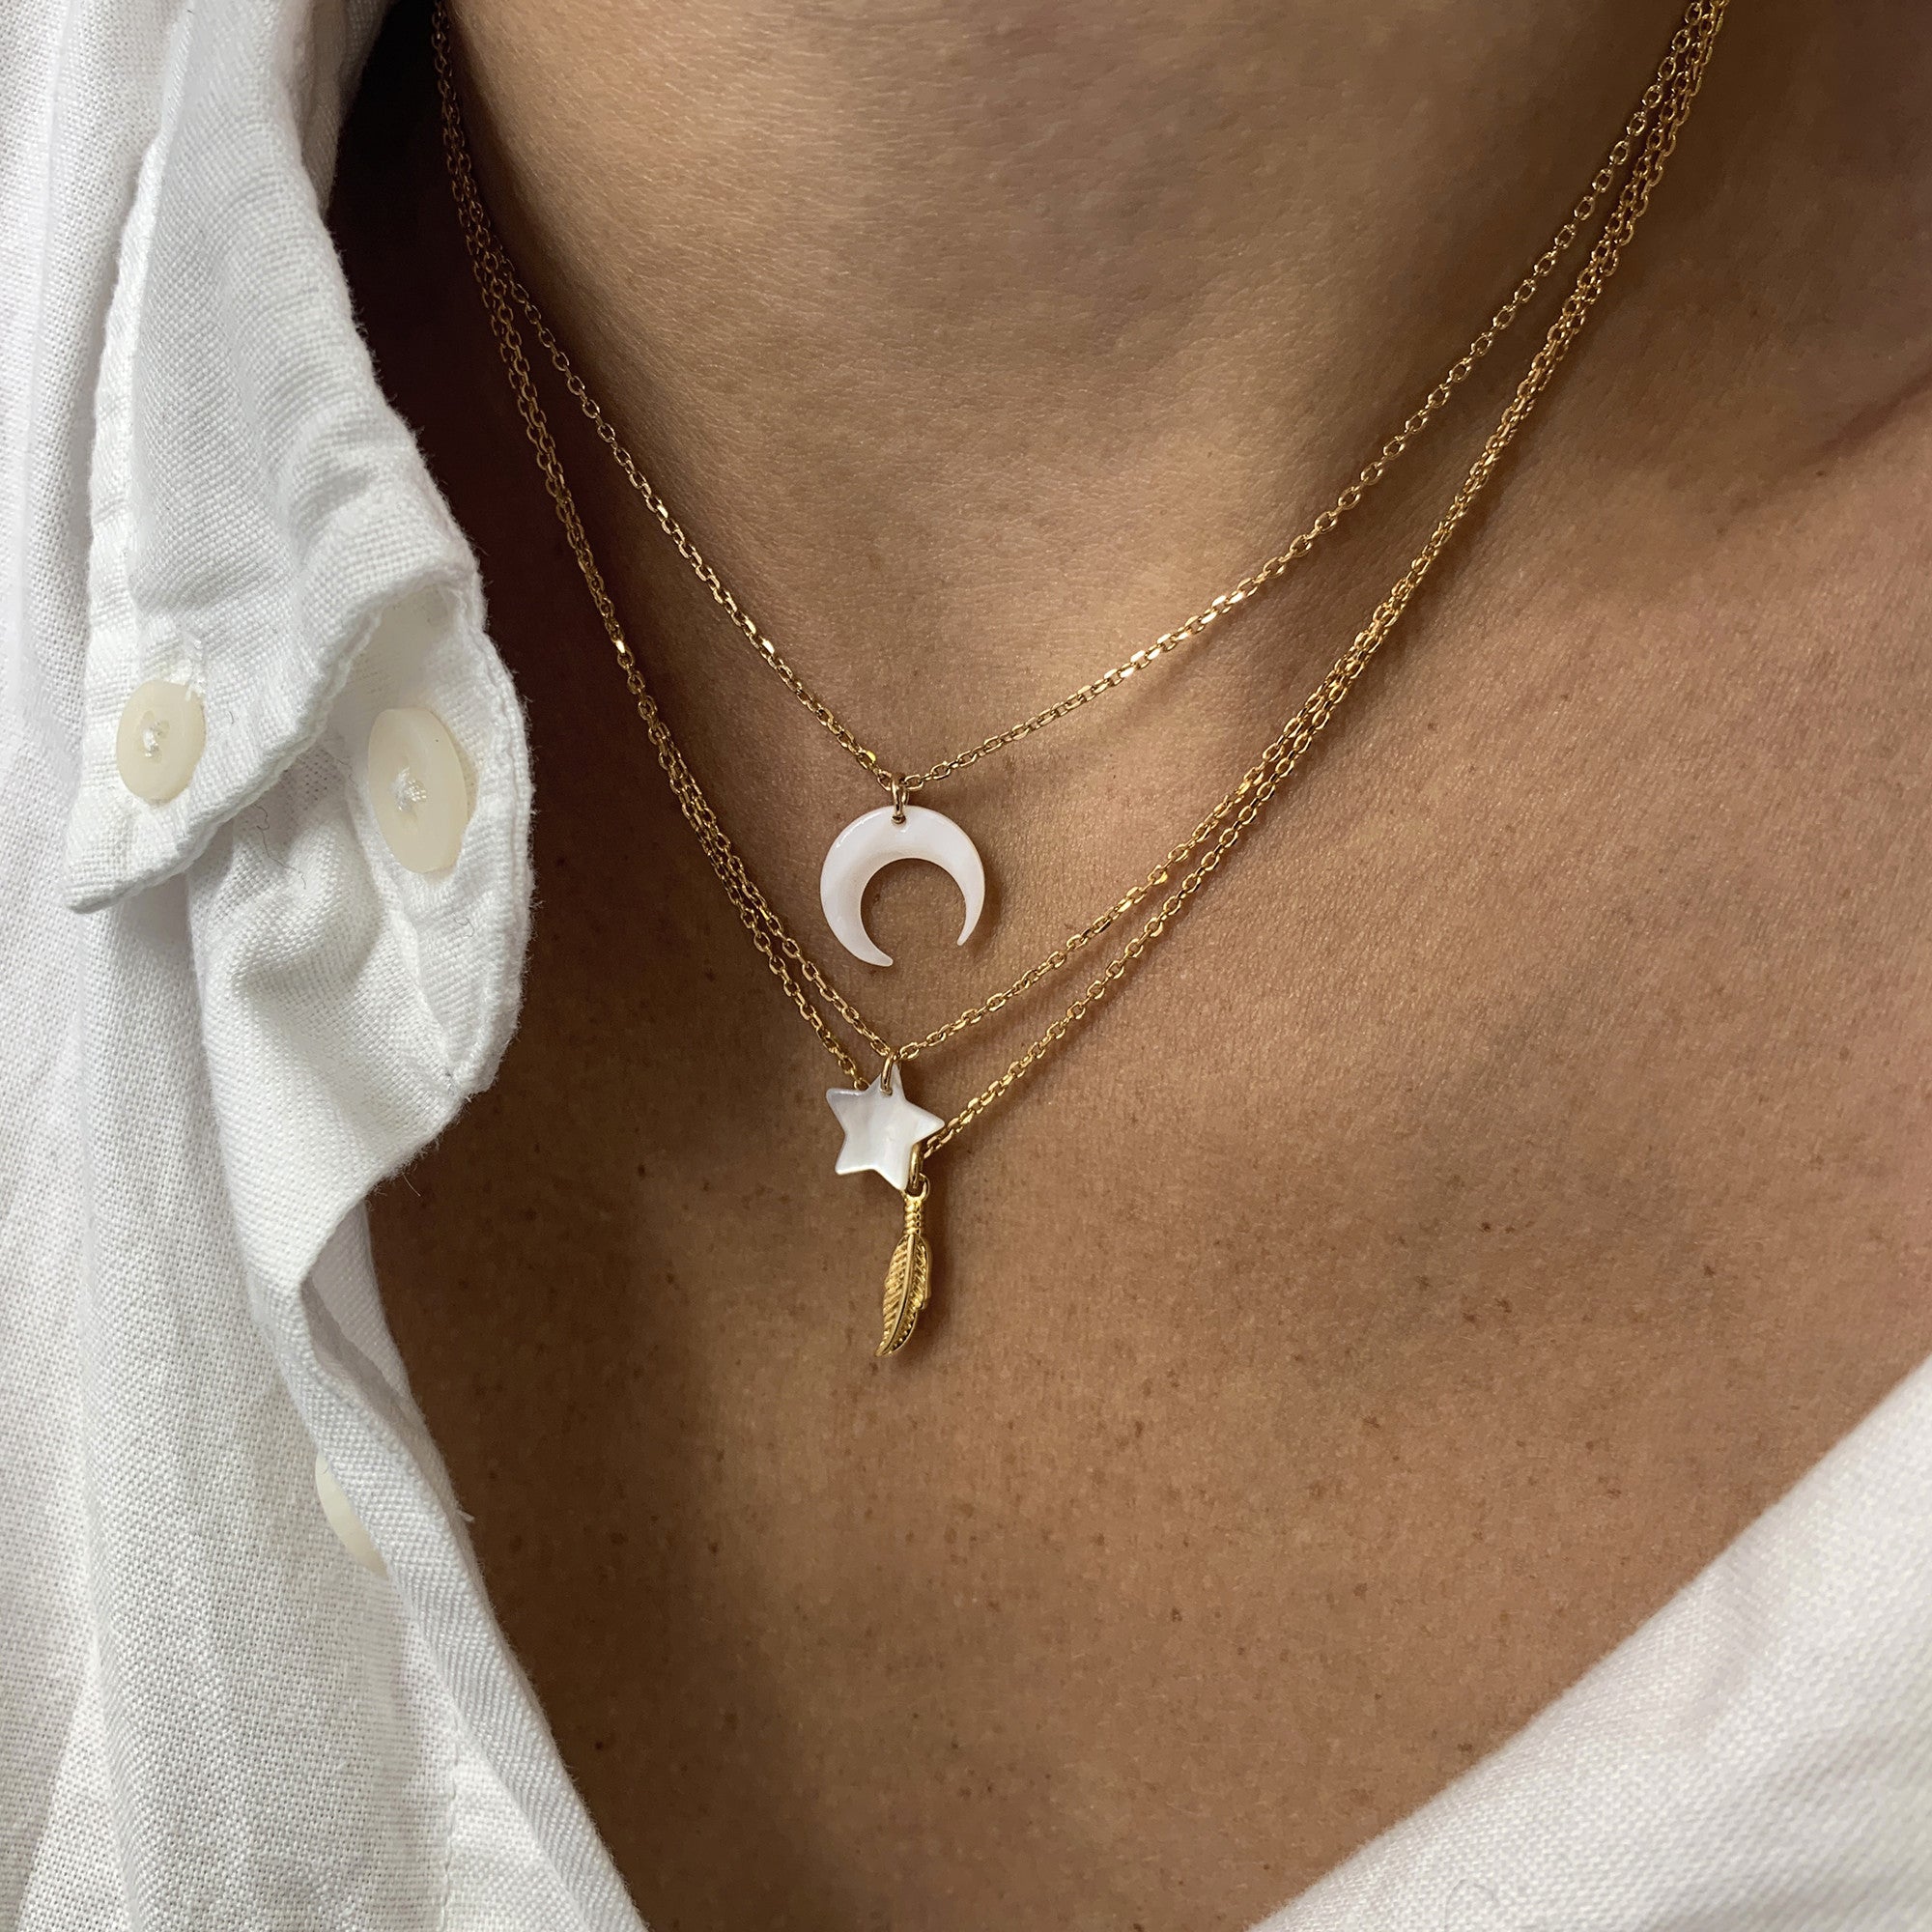 Mother-of-pearl moon charm necklace